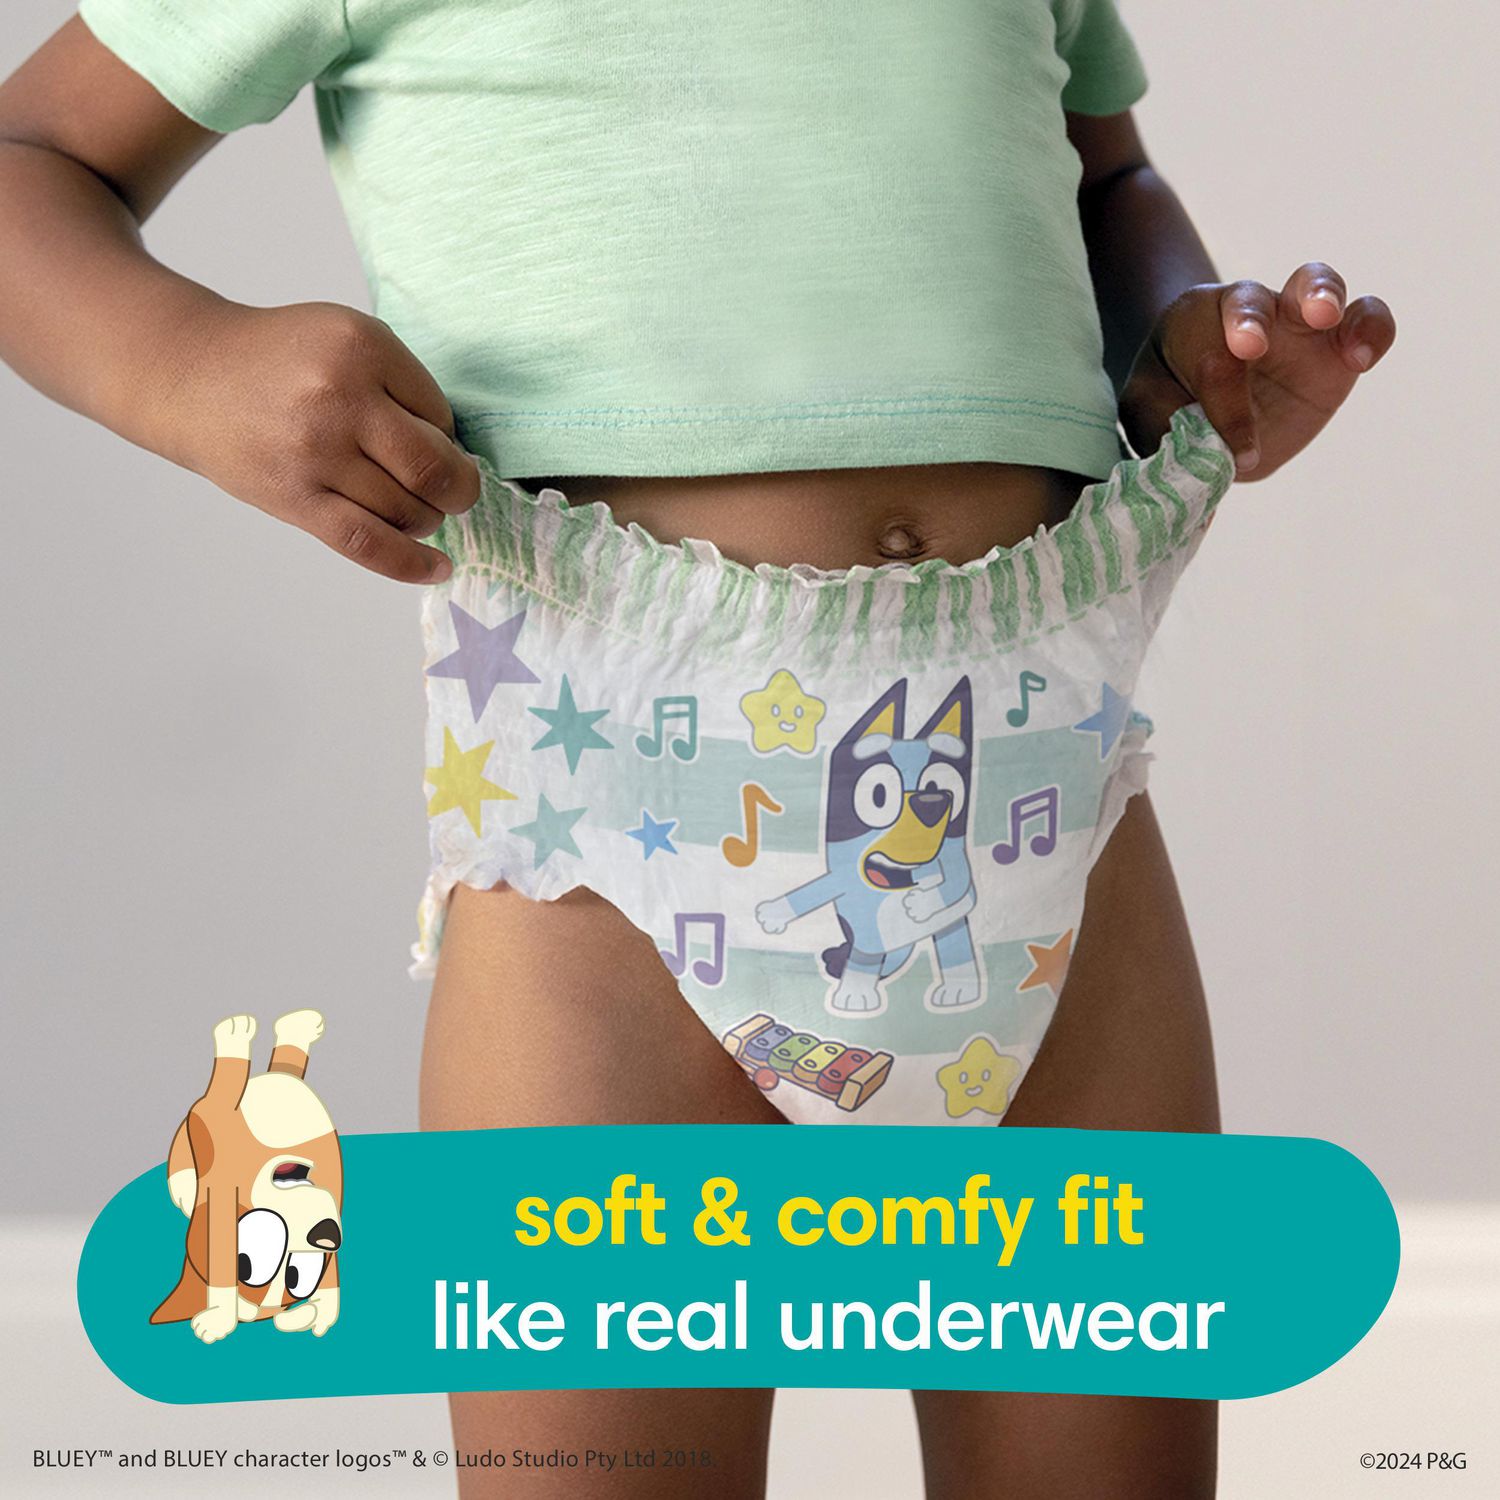 Pampers Easy Ups Training Pants Girls 4T-5T (37+ lbs), 56 count - City  Market